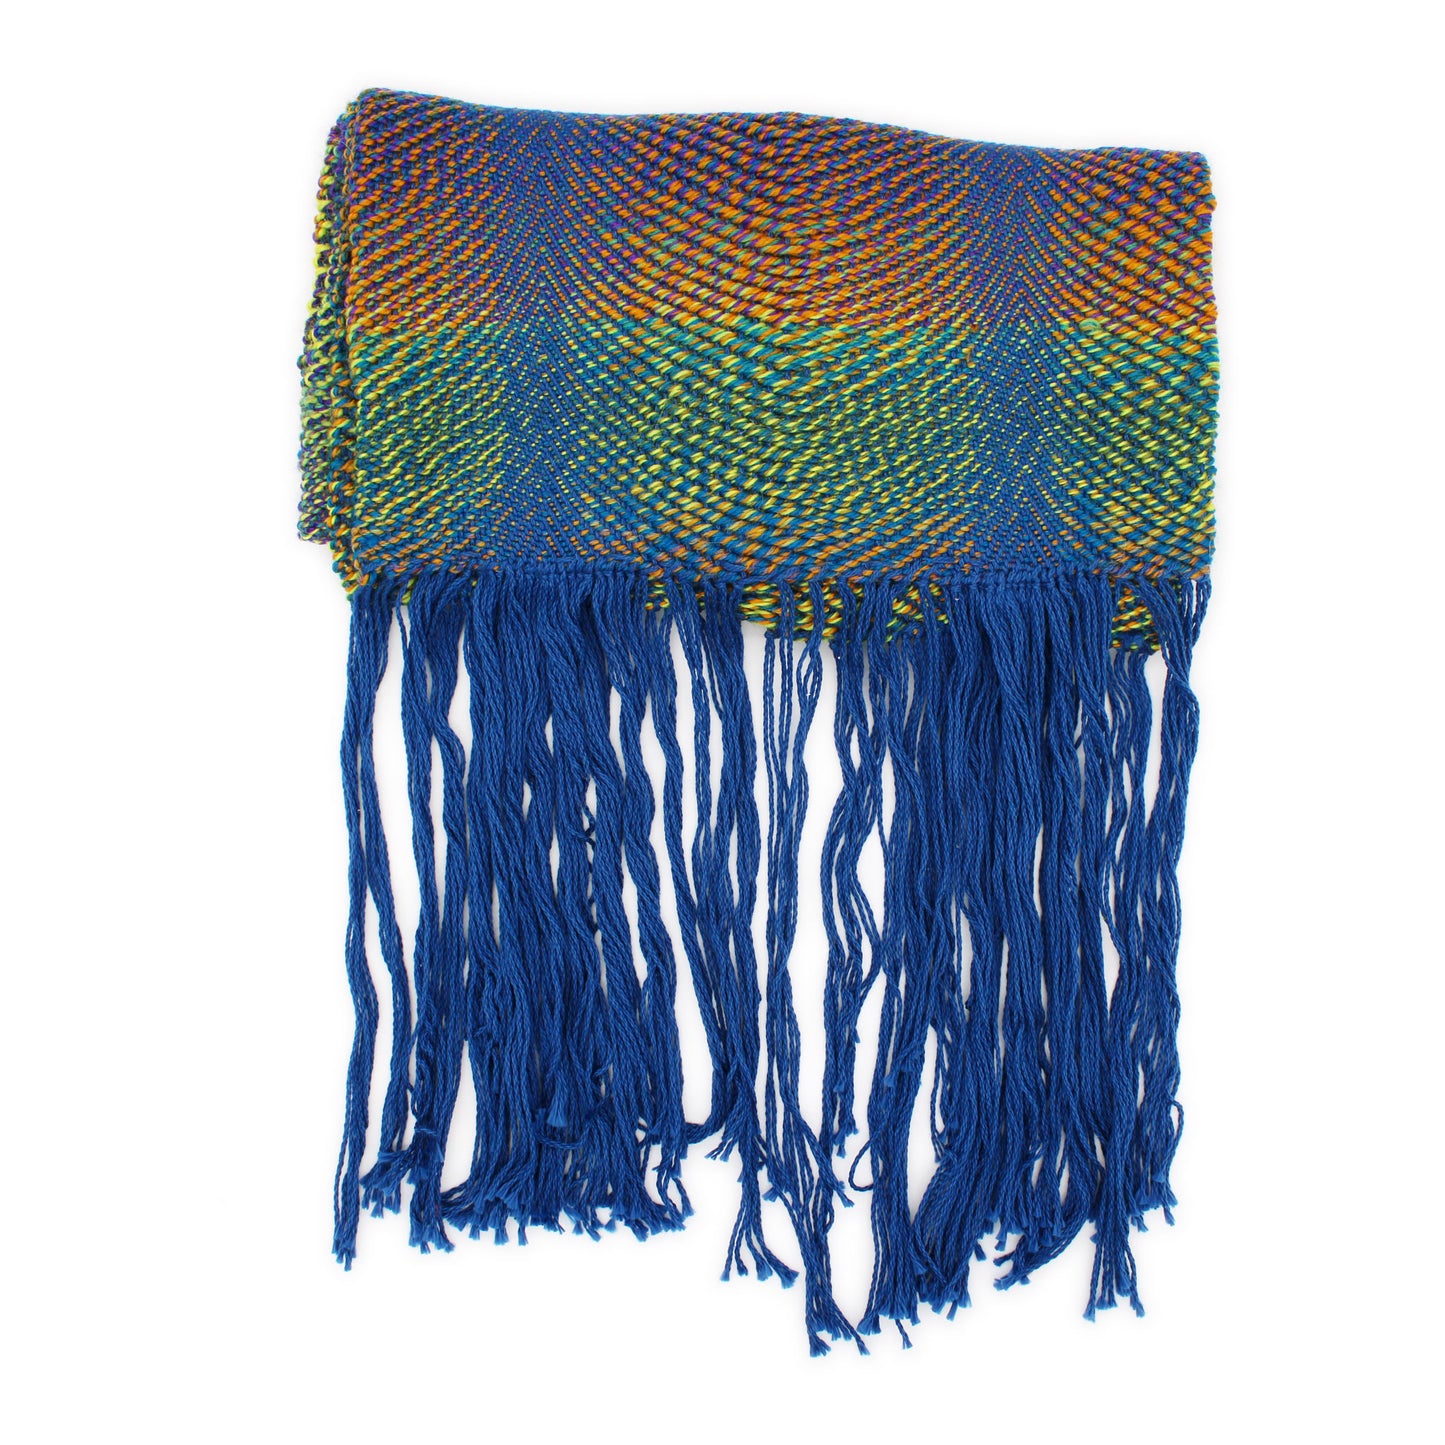 Hand-woven Scarf "Starry Night"